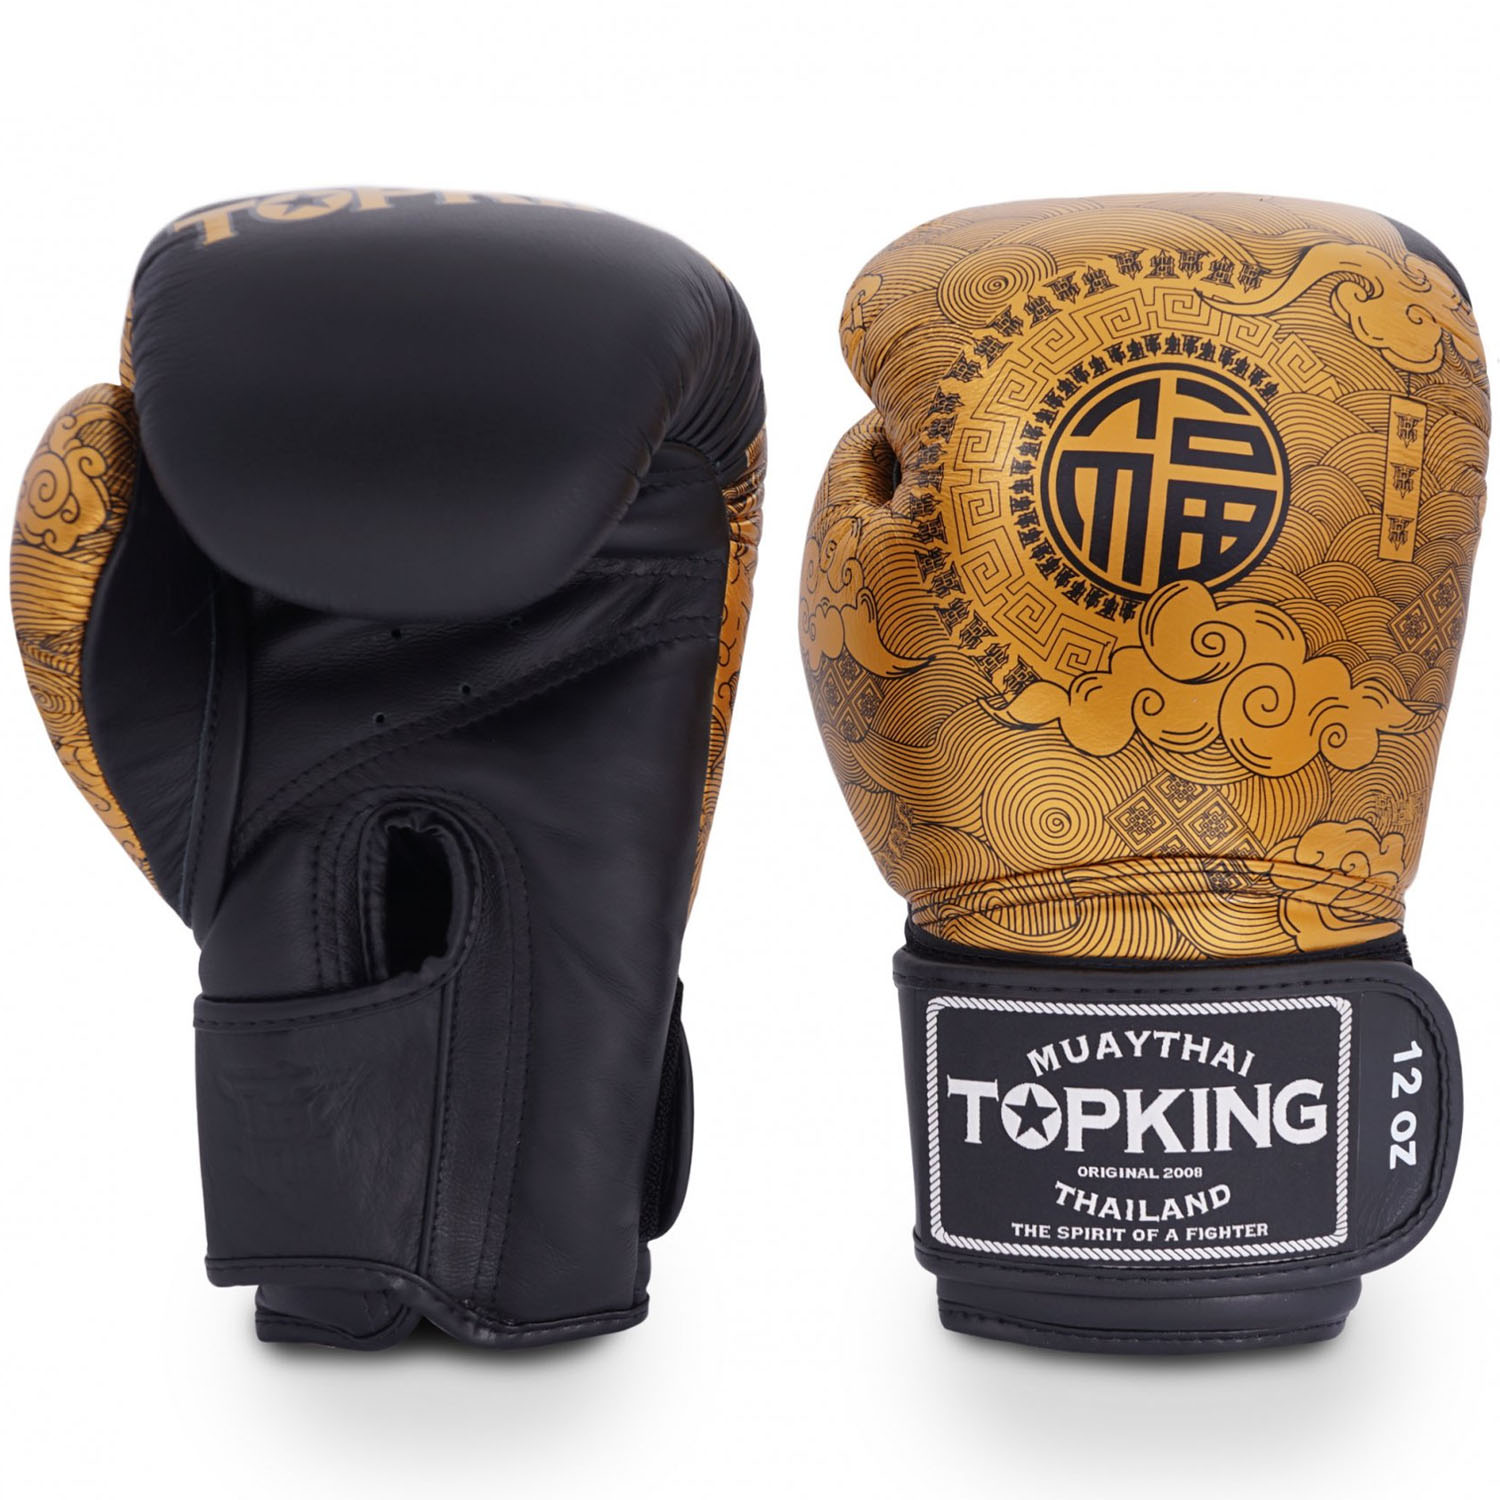 TOP KING BOXING Boxhandschuhe, Happiness Chinese, gold-schwarz, 12 Oz